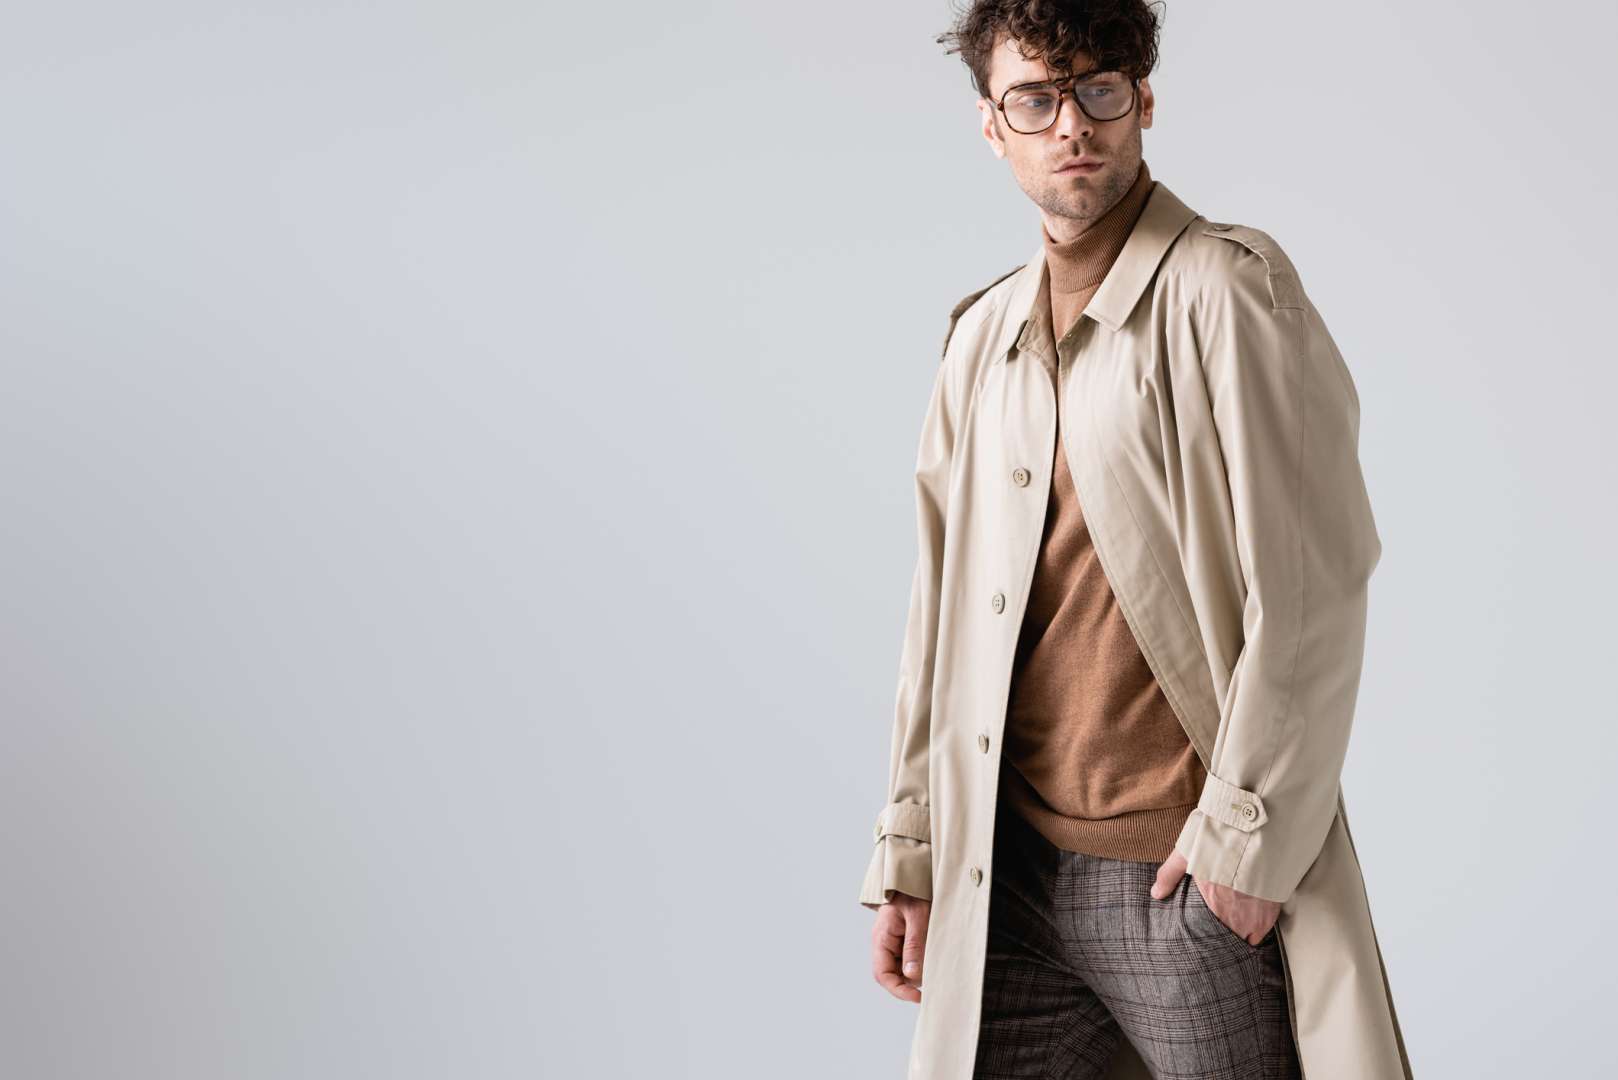 Young man with tousled hair and glasses in a trench coat, sweater, and patterned pants